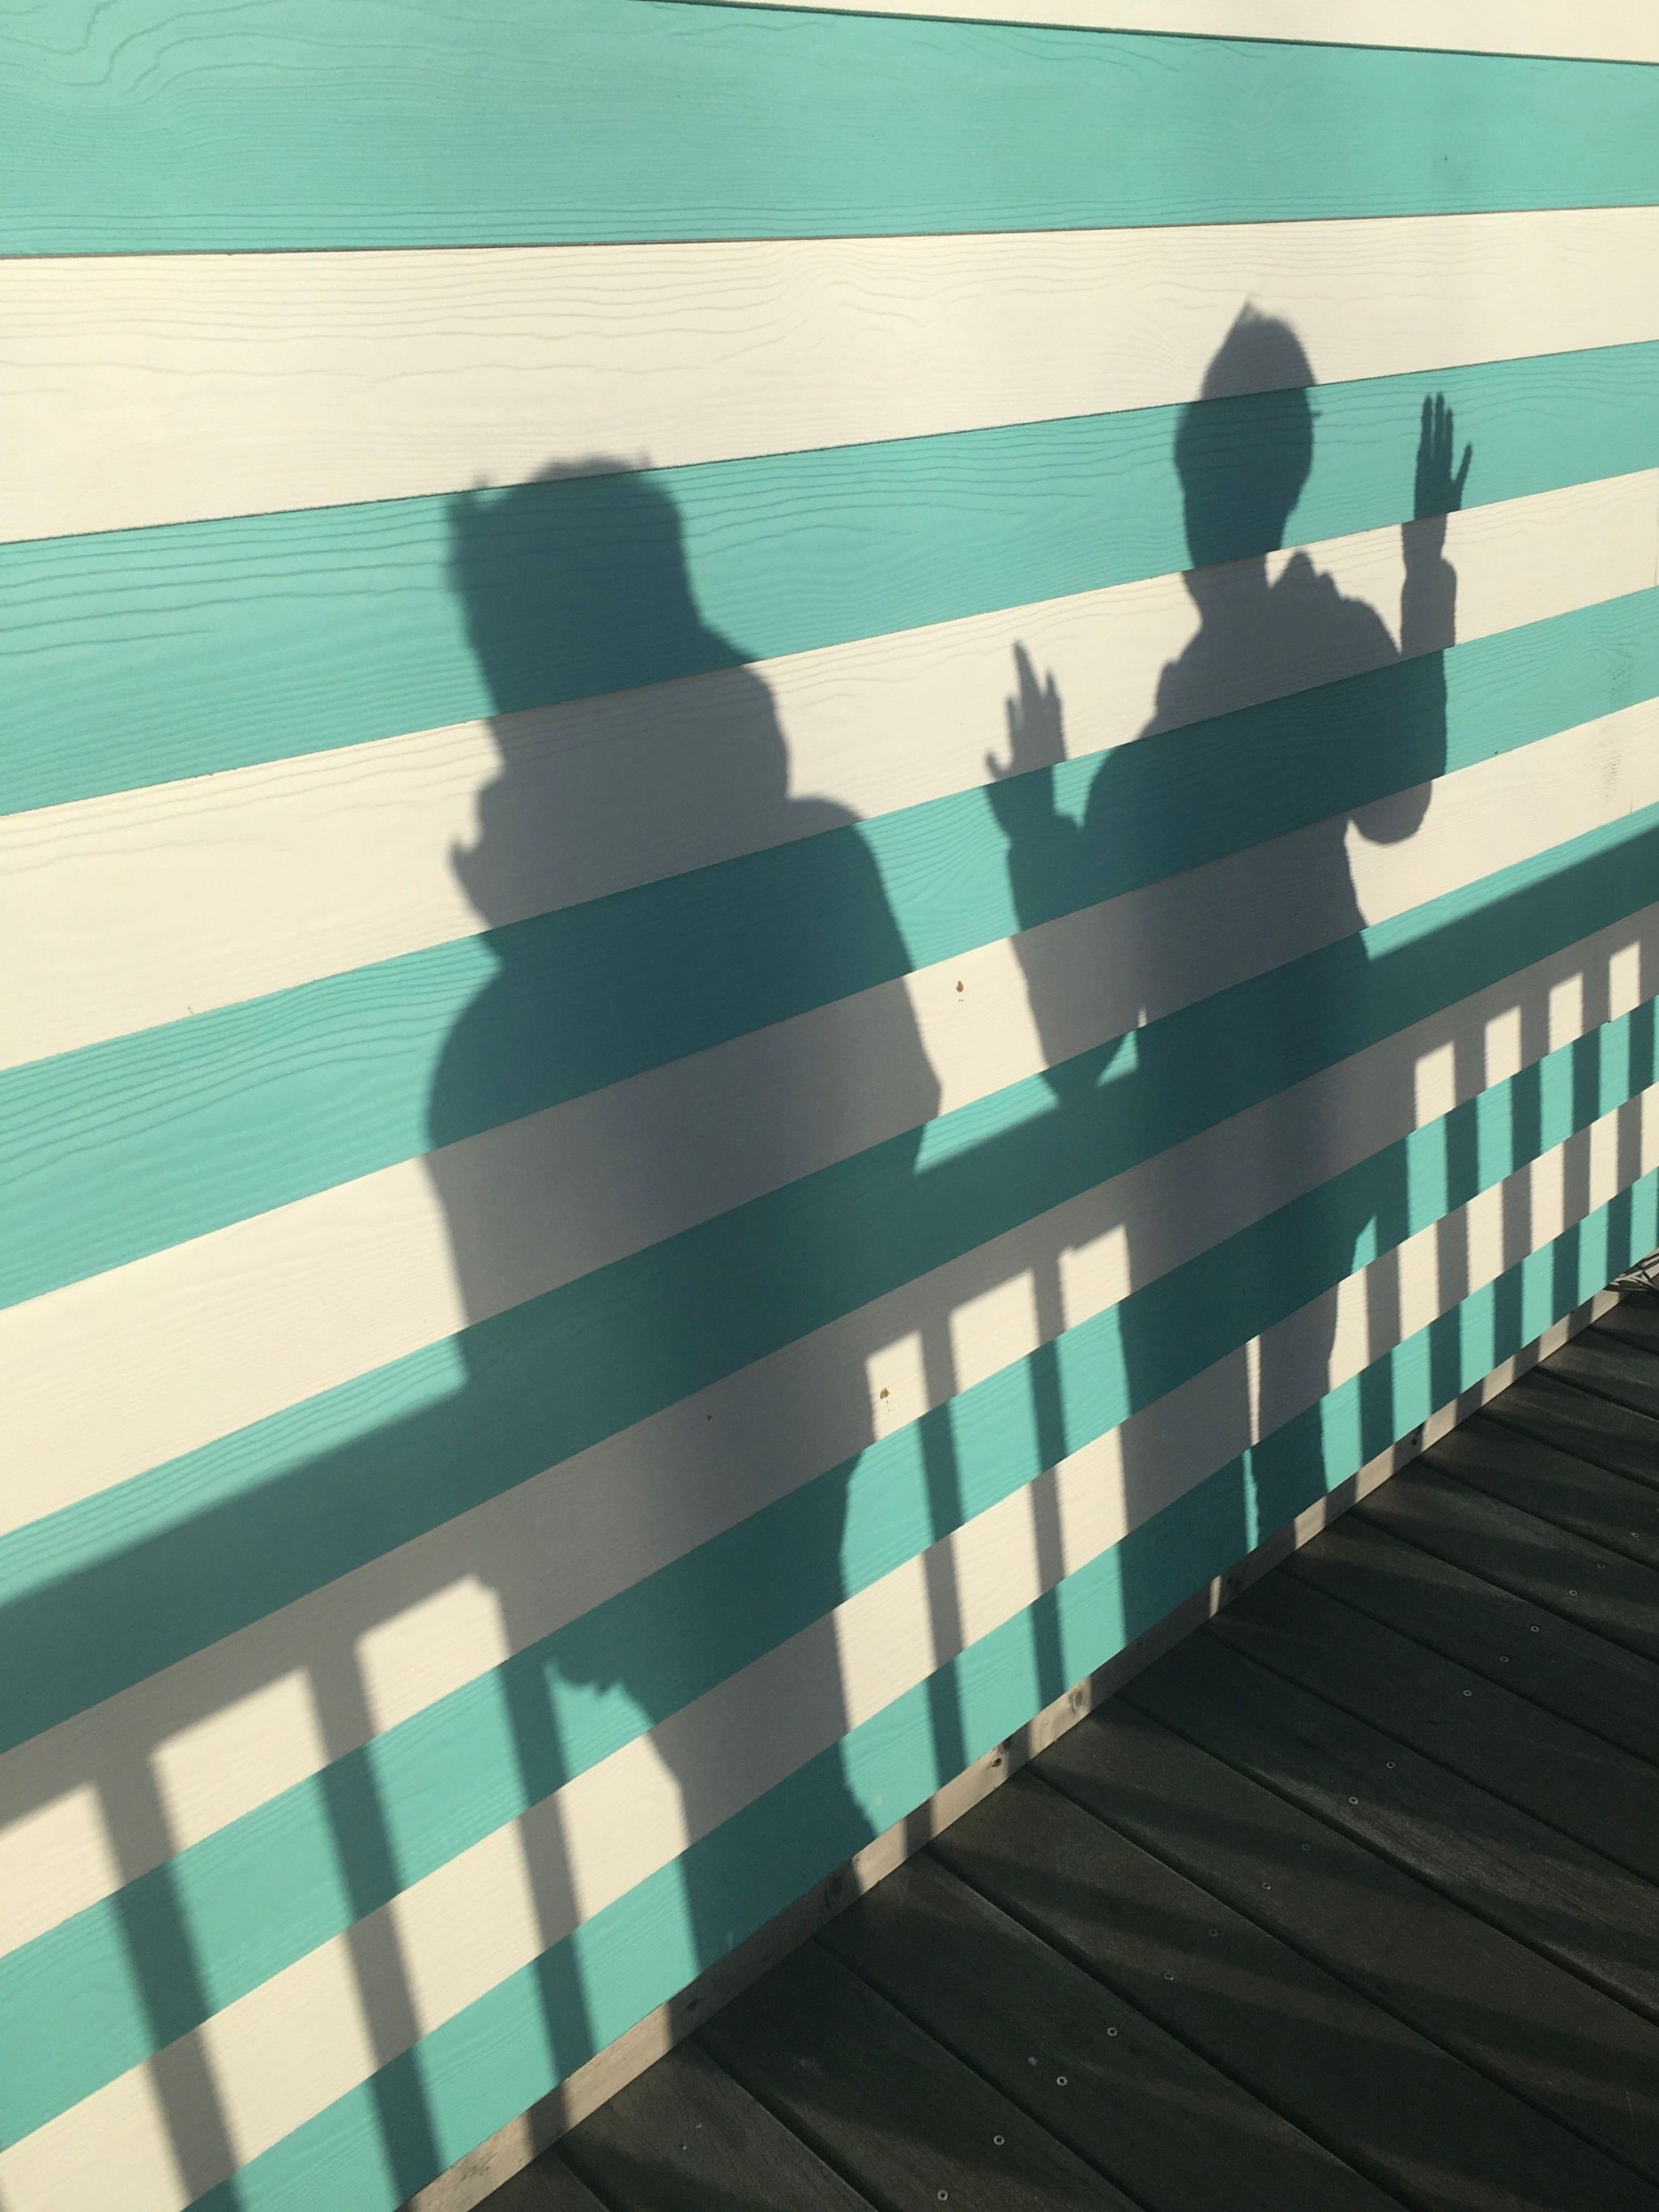 The shadows of two people on a striped wall